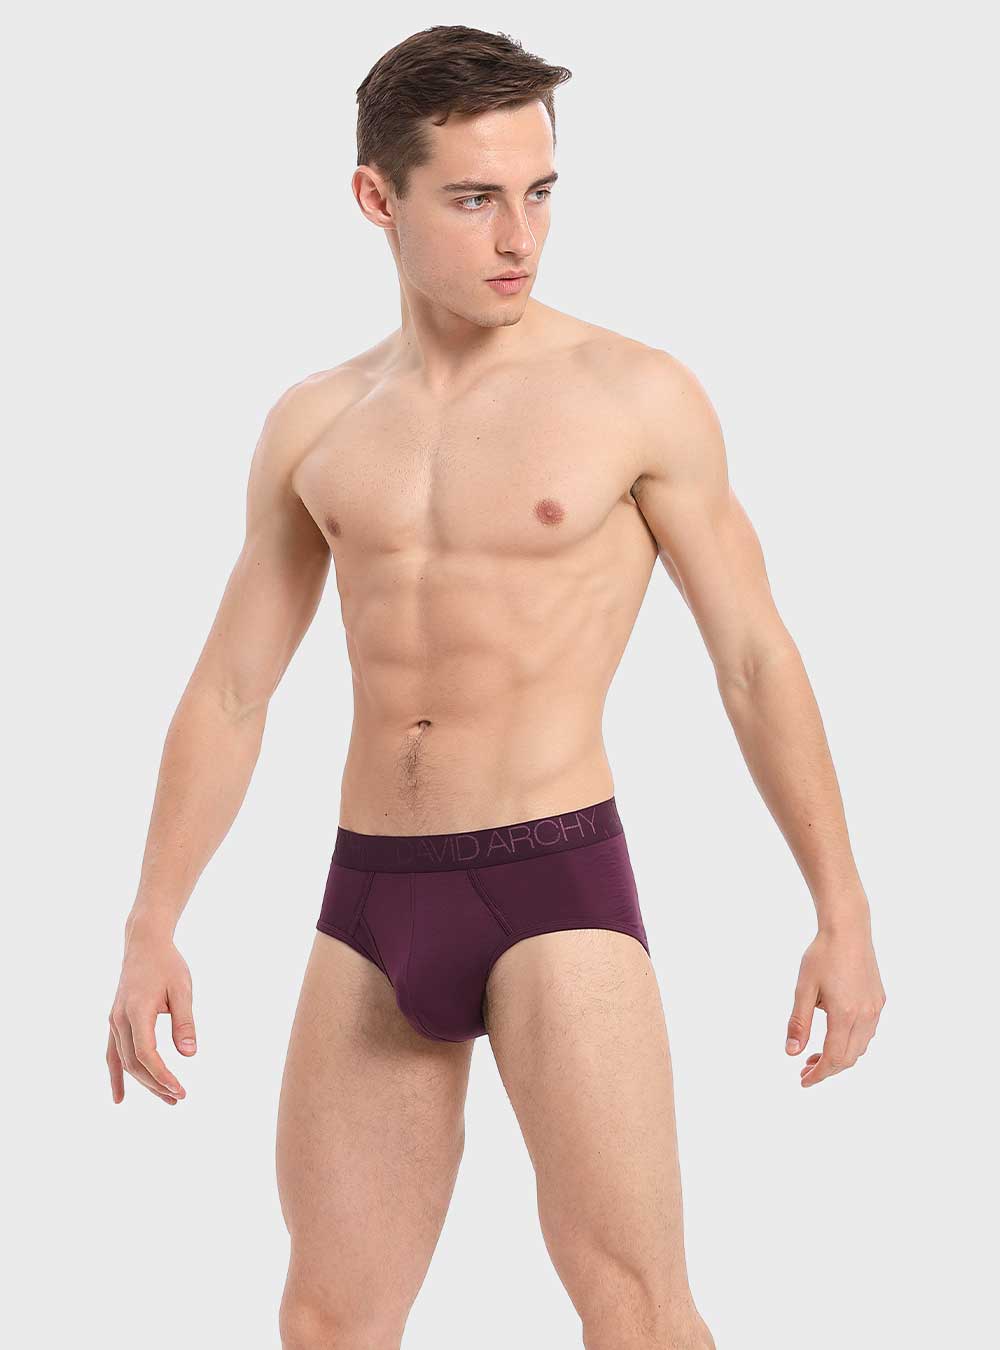 David Archy Clothing, David Archy underwear offers a cotton-candy-like  softness that makes you instinctively close your eyes and sink into a deep  sleep. 🛒L